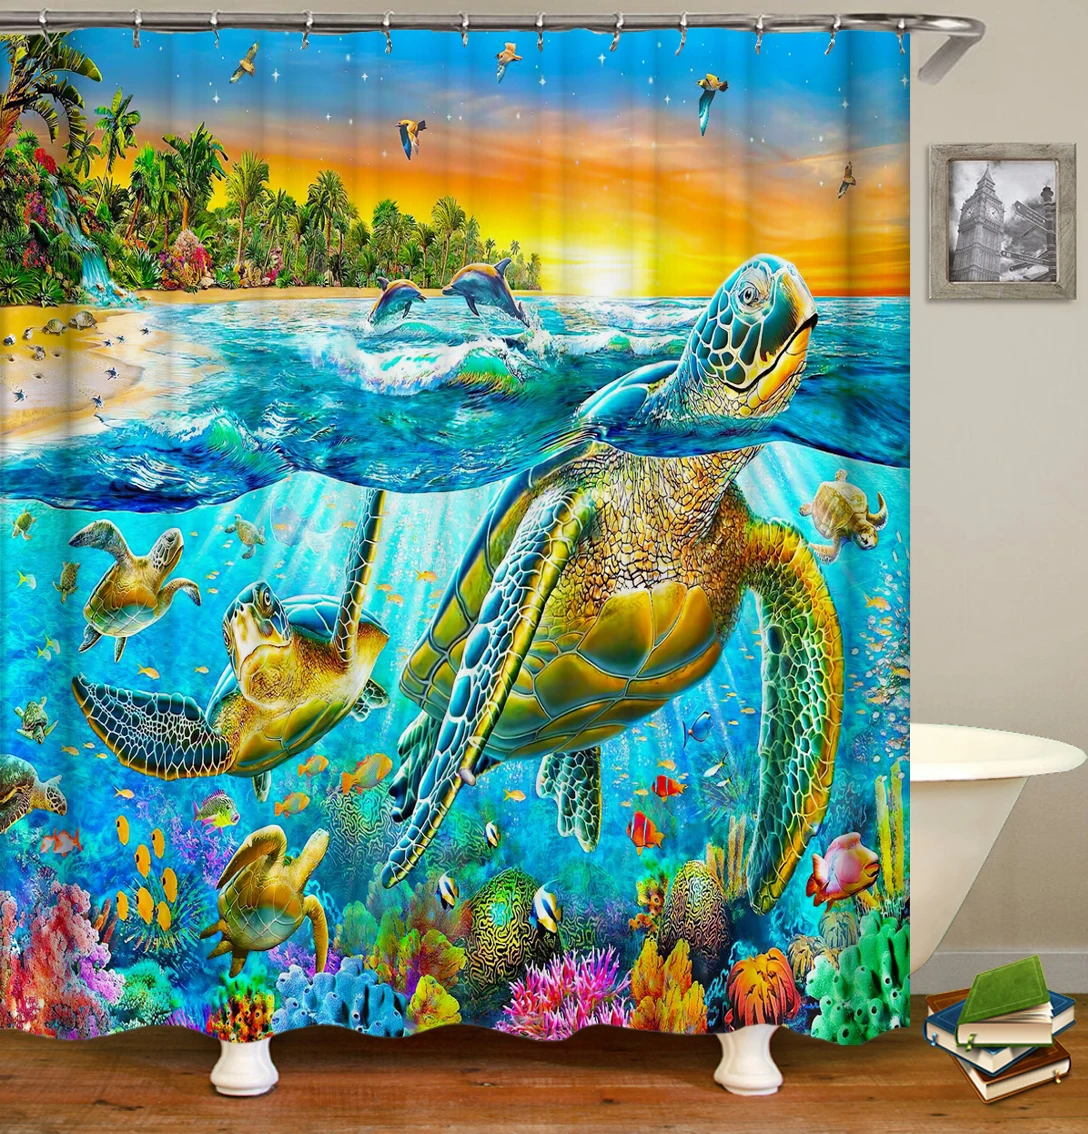 

Ocean Sea Turtle Shower Curtain Bathroom Curtains Dolphin Waterproof Polyester Fabric 180X180cm Home Decor With 12 Hooks